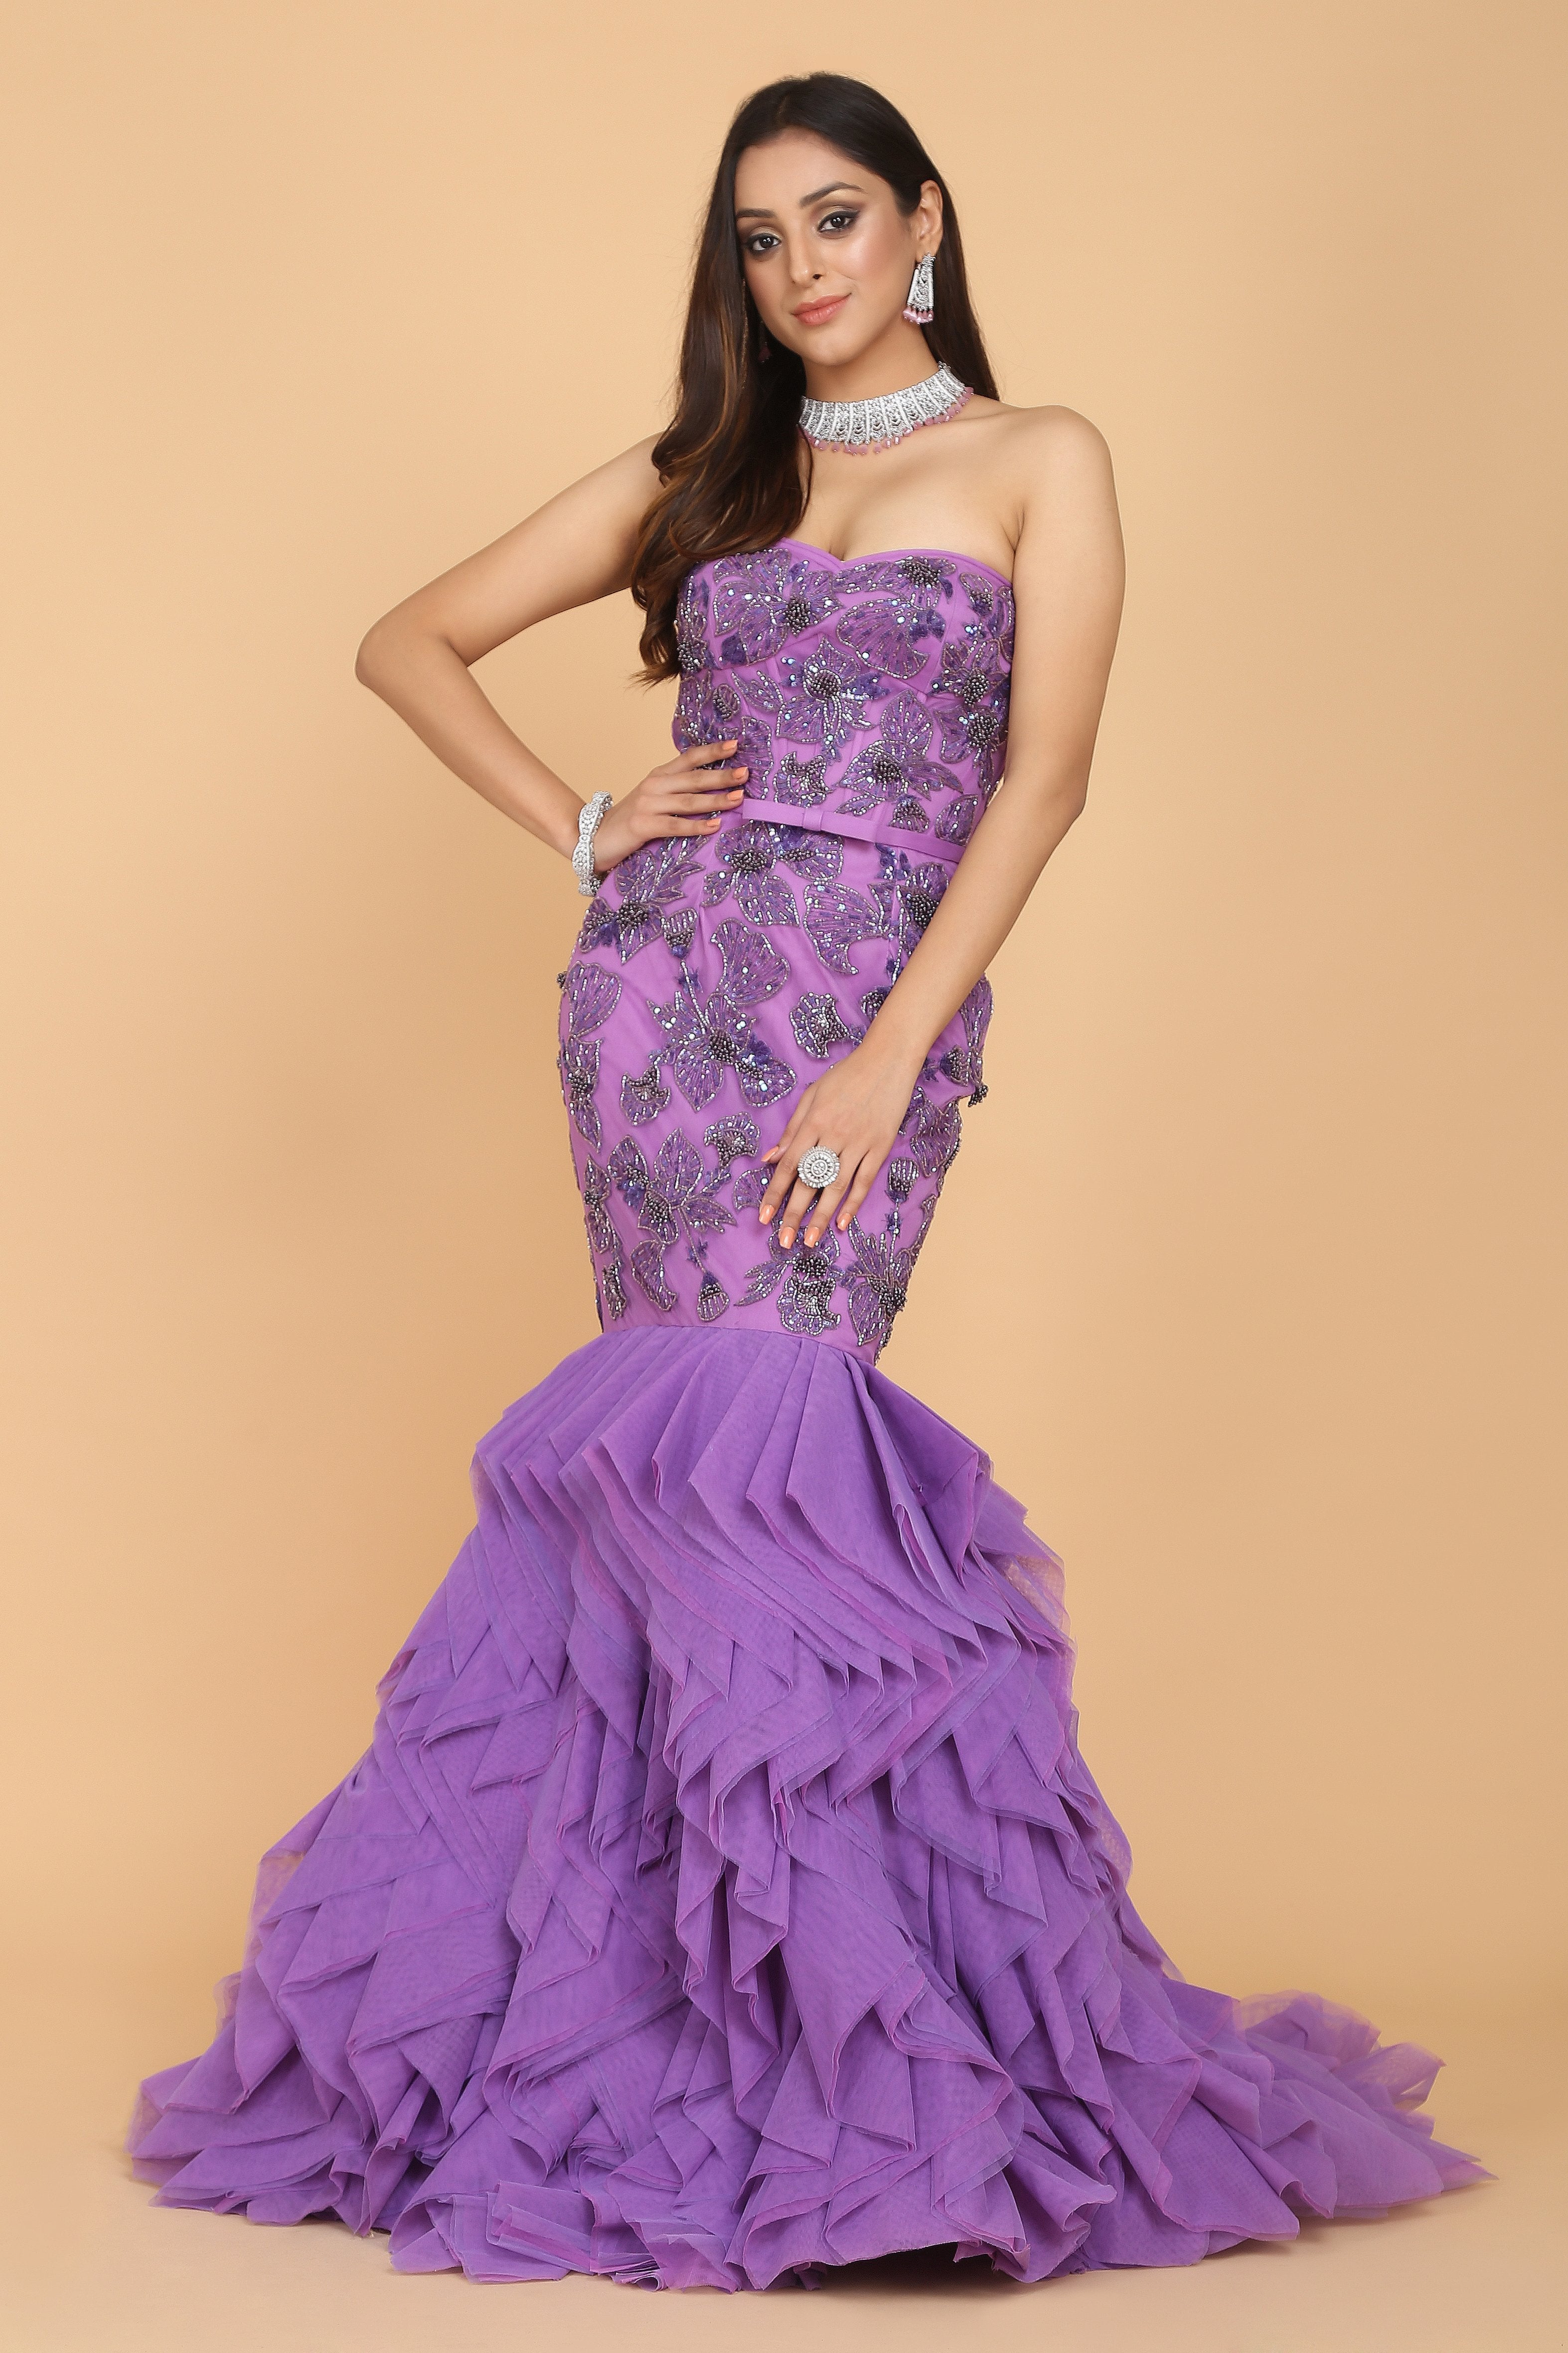 Amit GT - Provence Gown